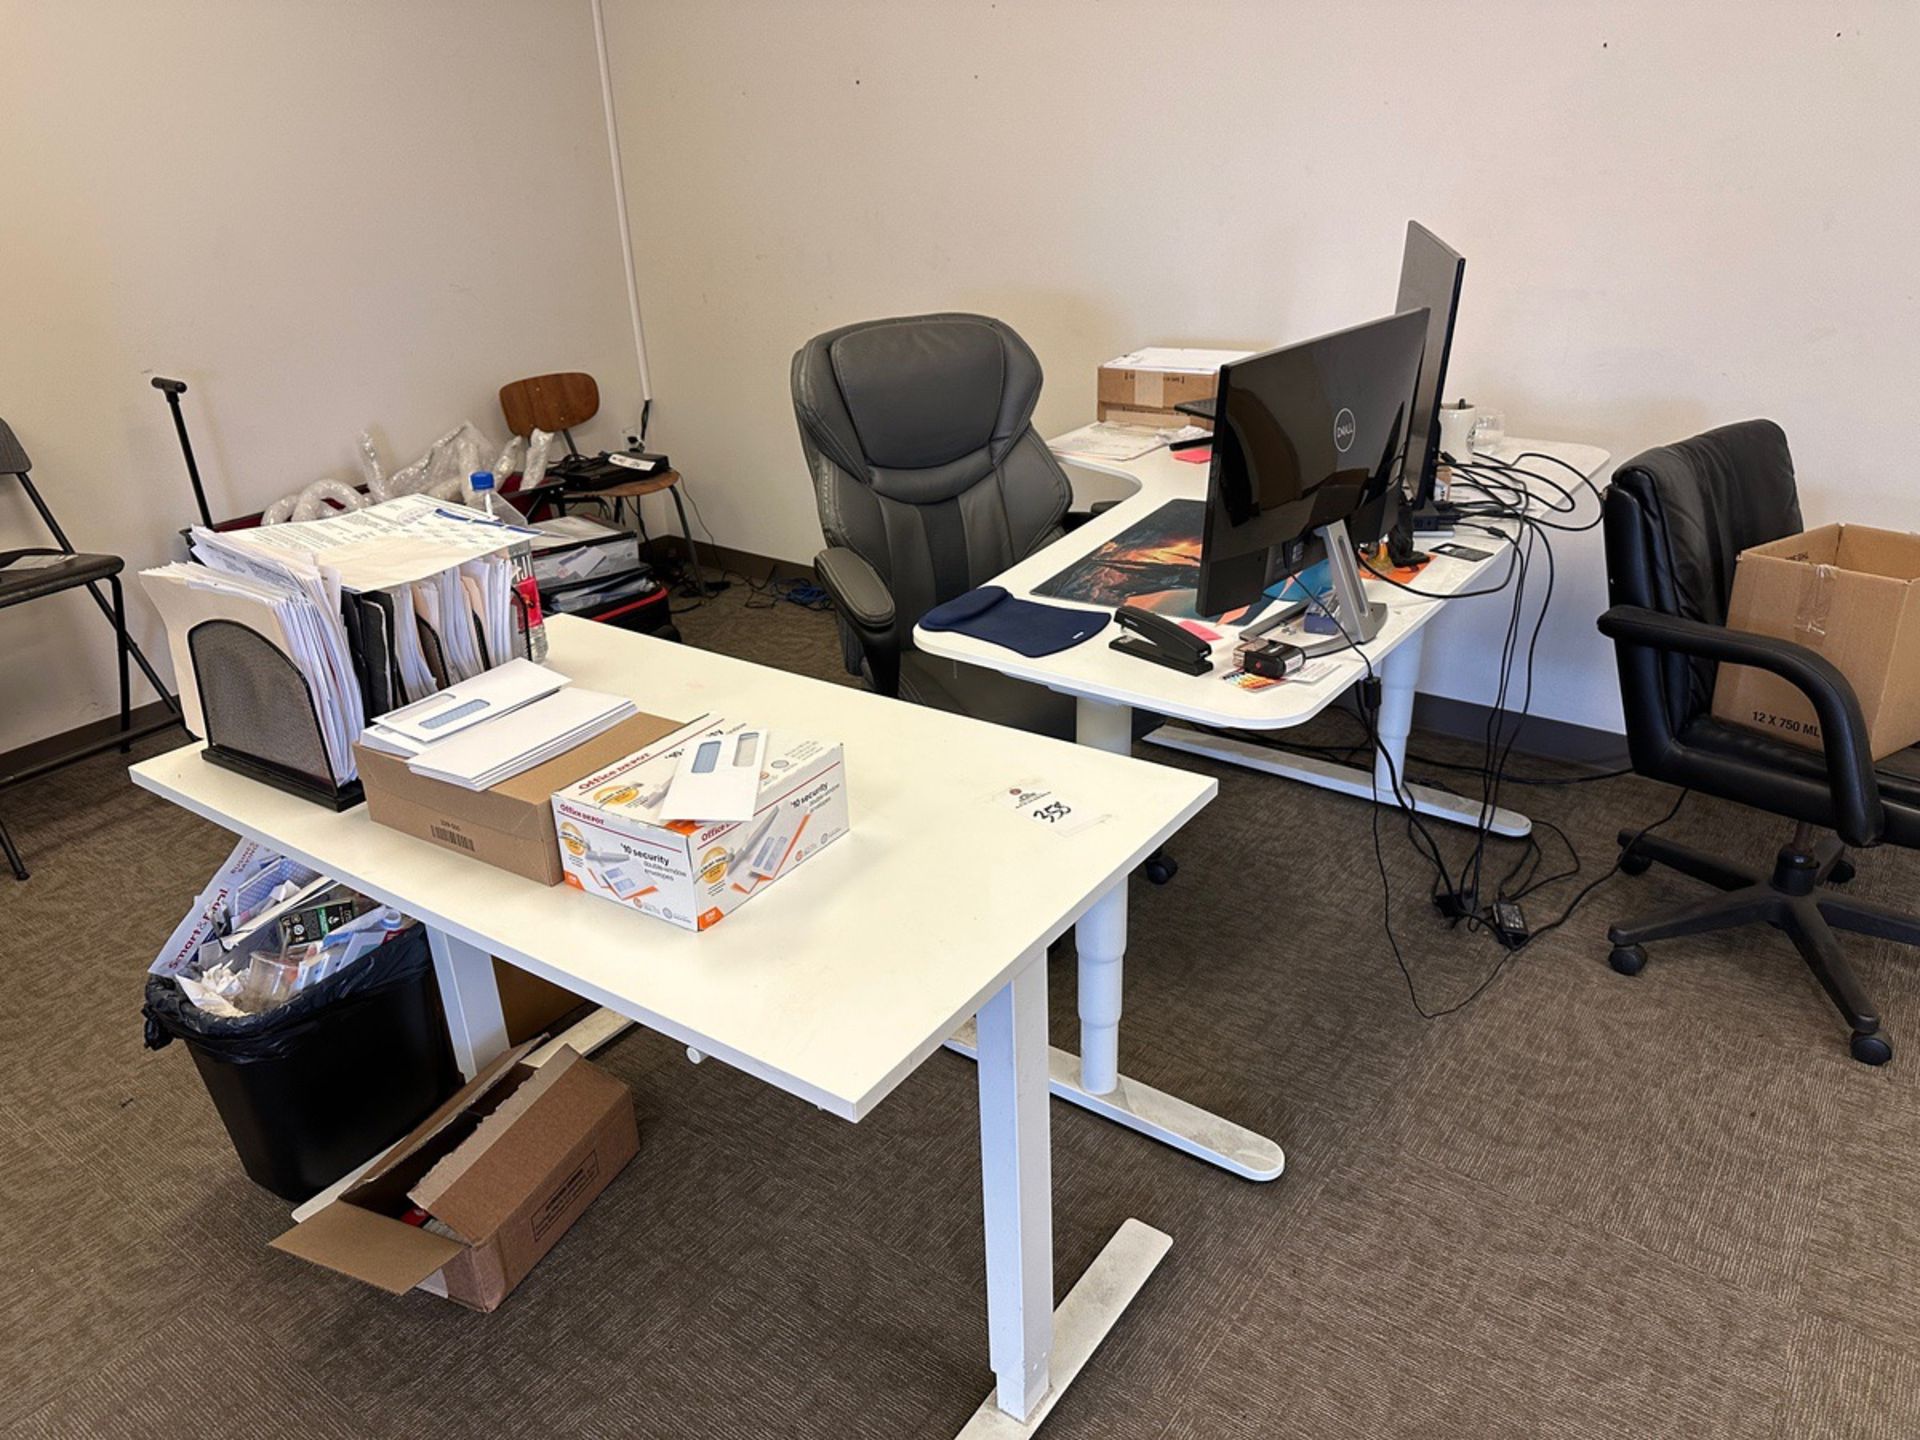 Lot of Adjustable Height Desks (No Contents) - (1) 28"" x 42"" and (1) 2' x 6' Corn | Rig Fee $125